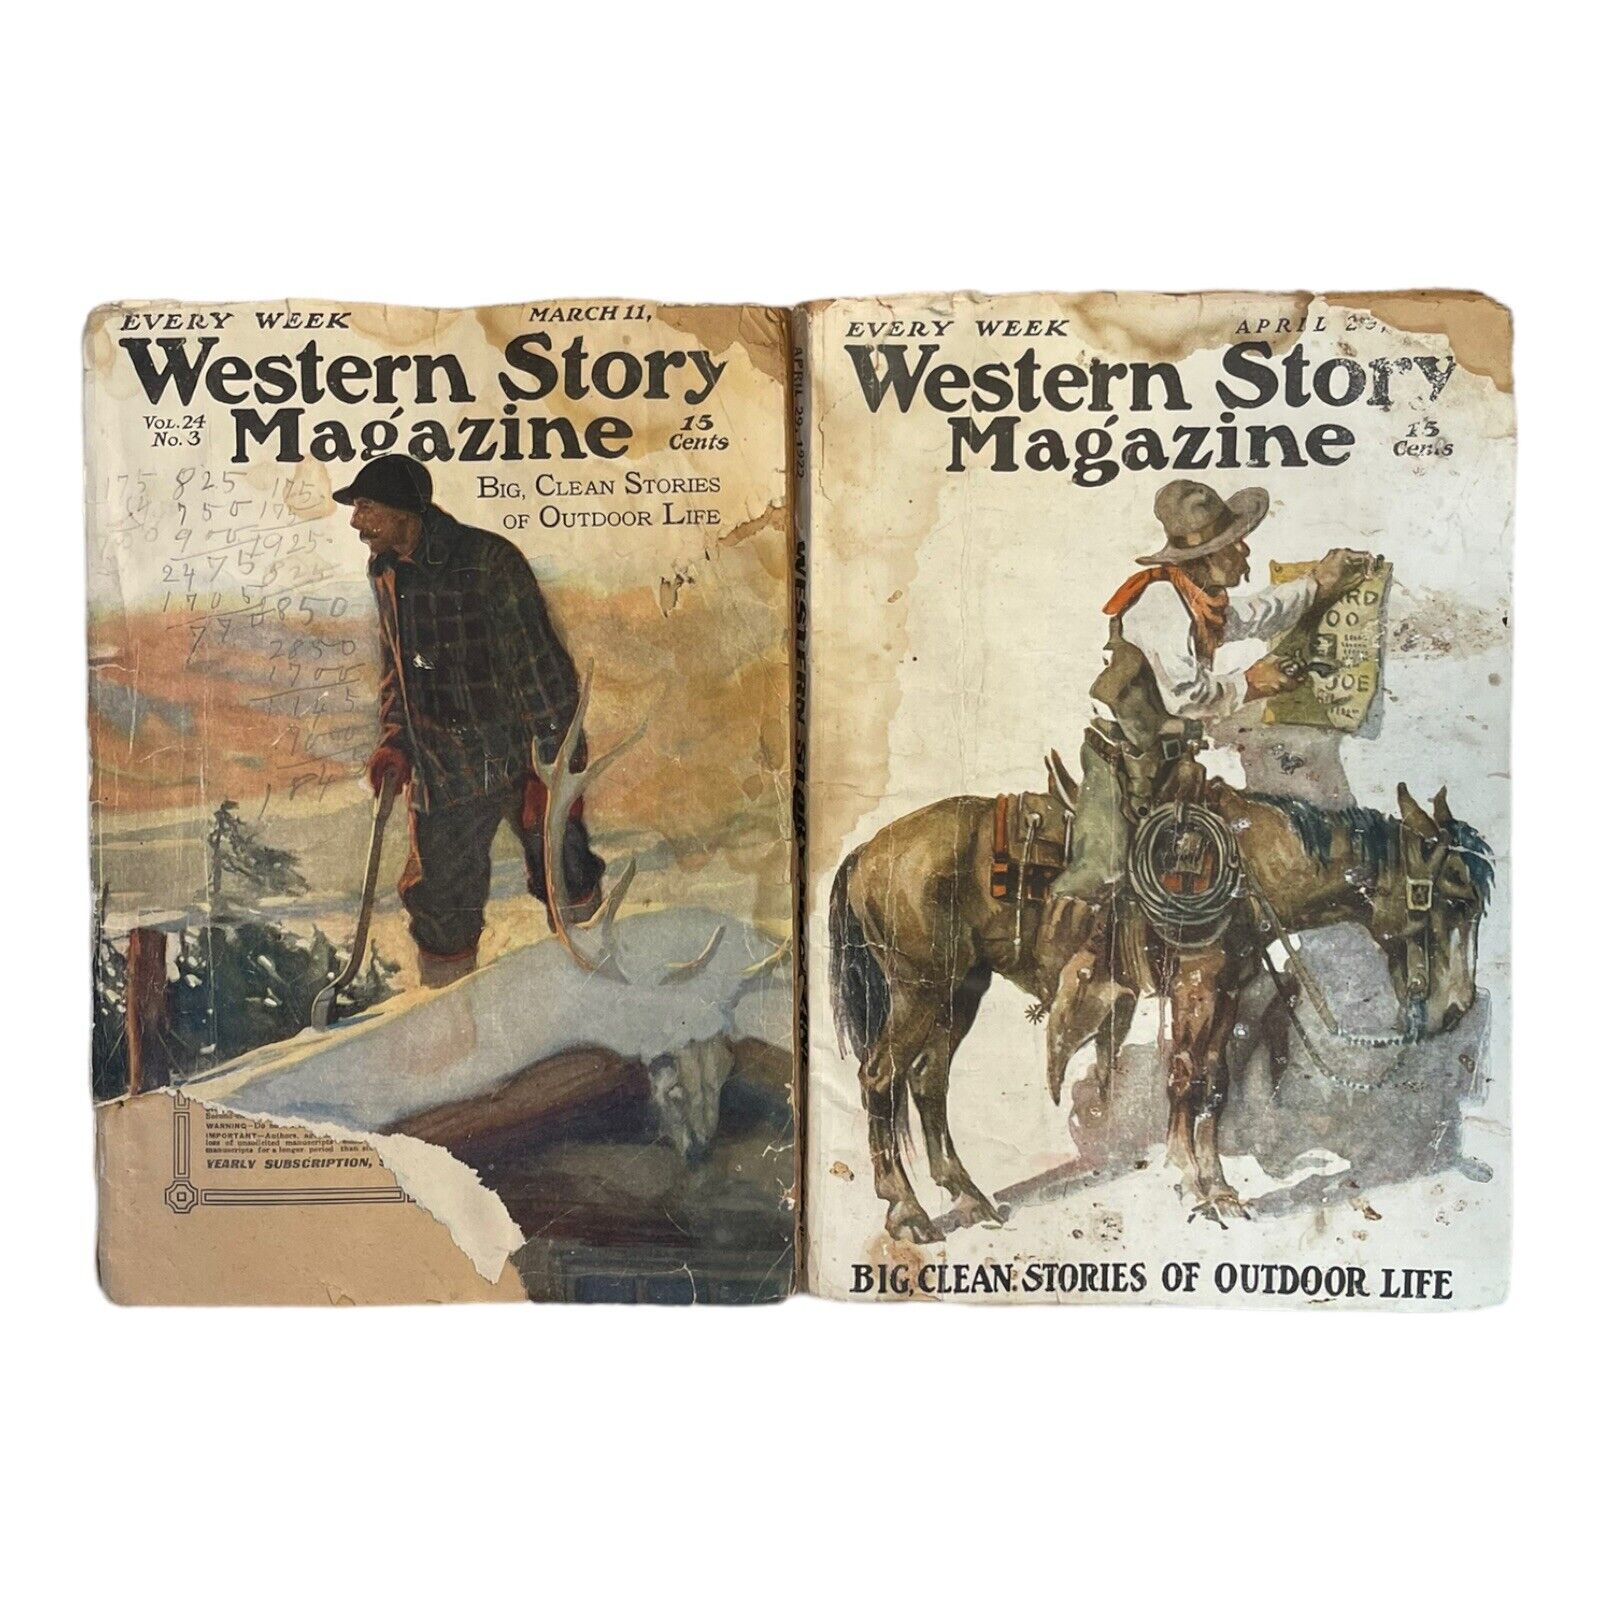 VINTAGE 1922 Western Story Magazine Pulp Big Clean Stories of Outdoor Life LOT 2